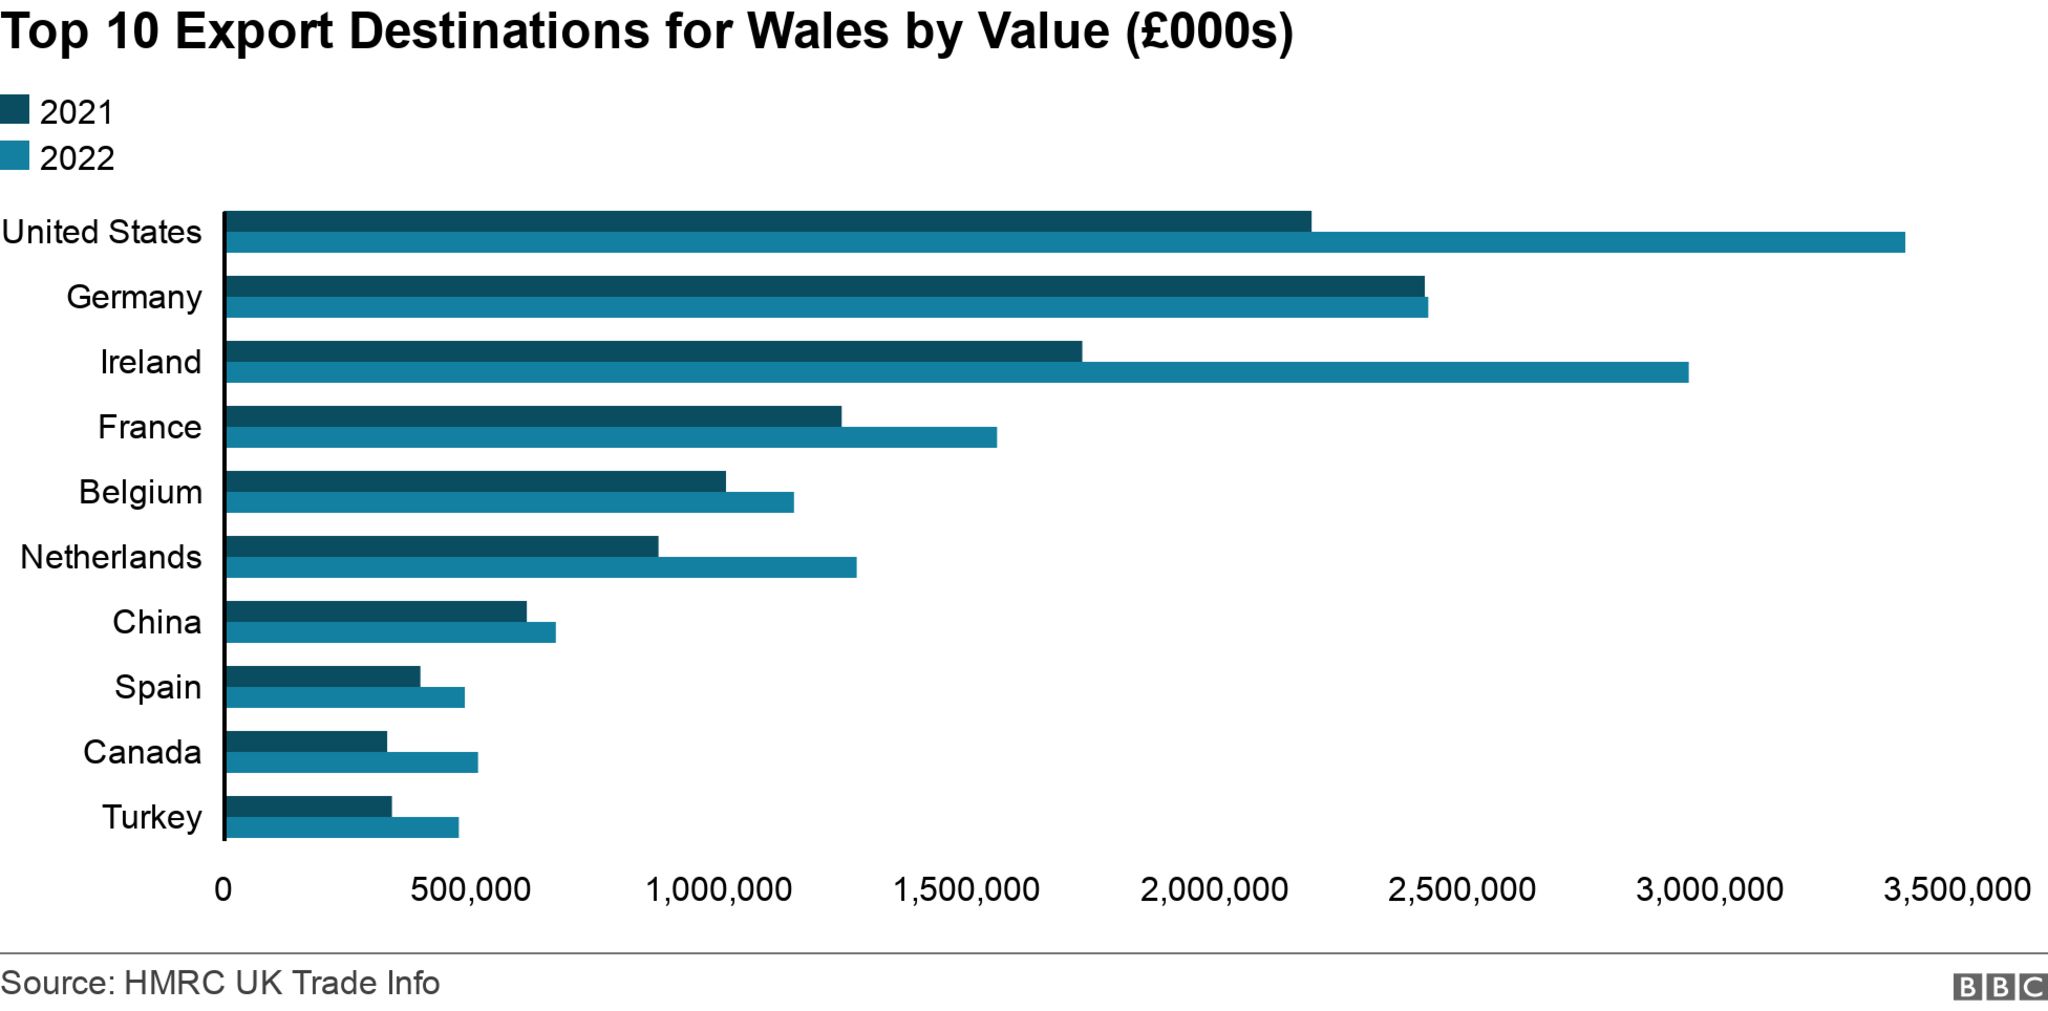 Top 10 Wales export destinations by value in thousands sterling